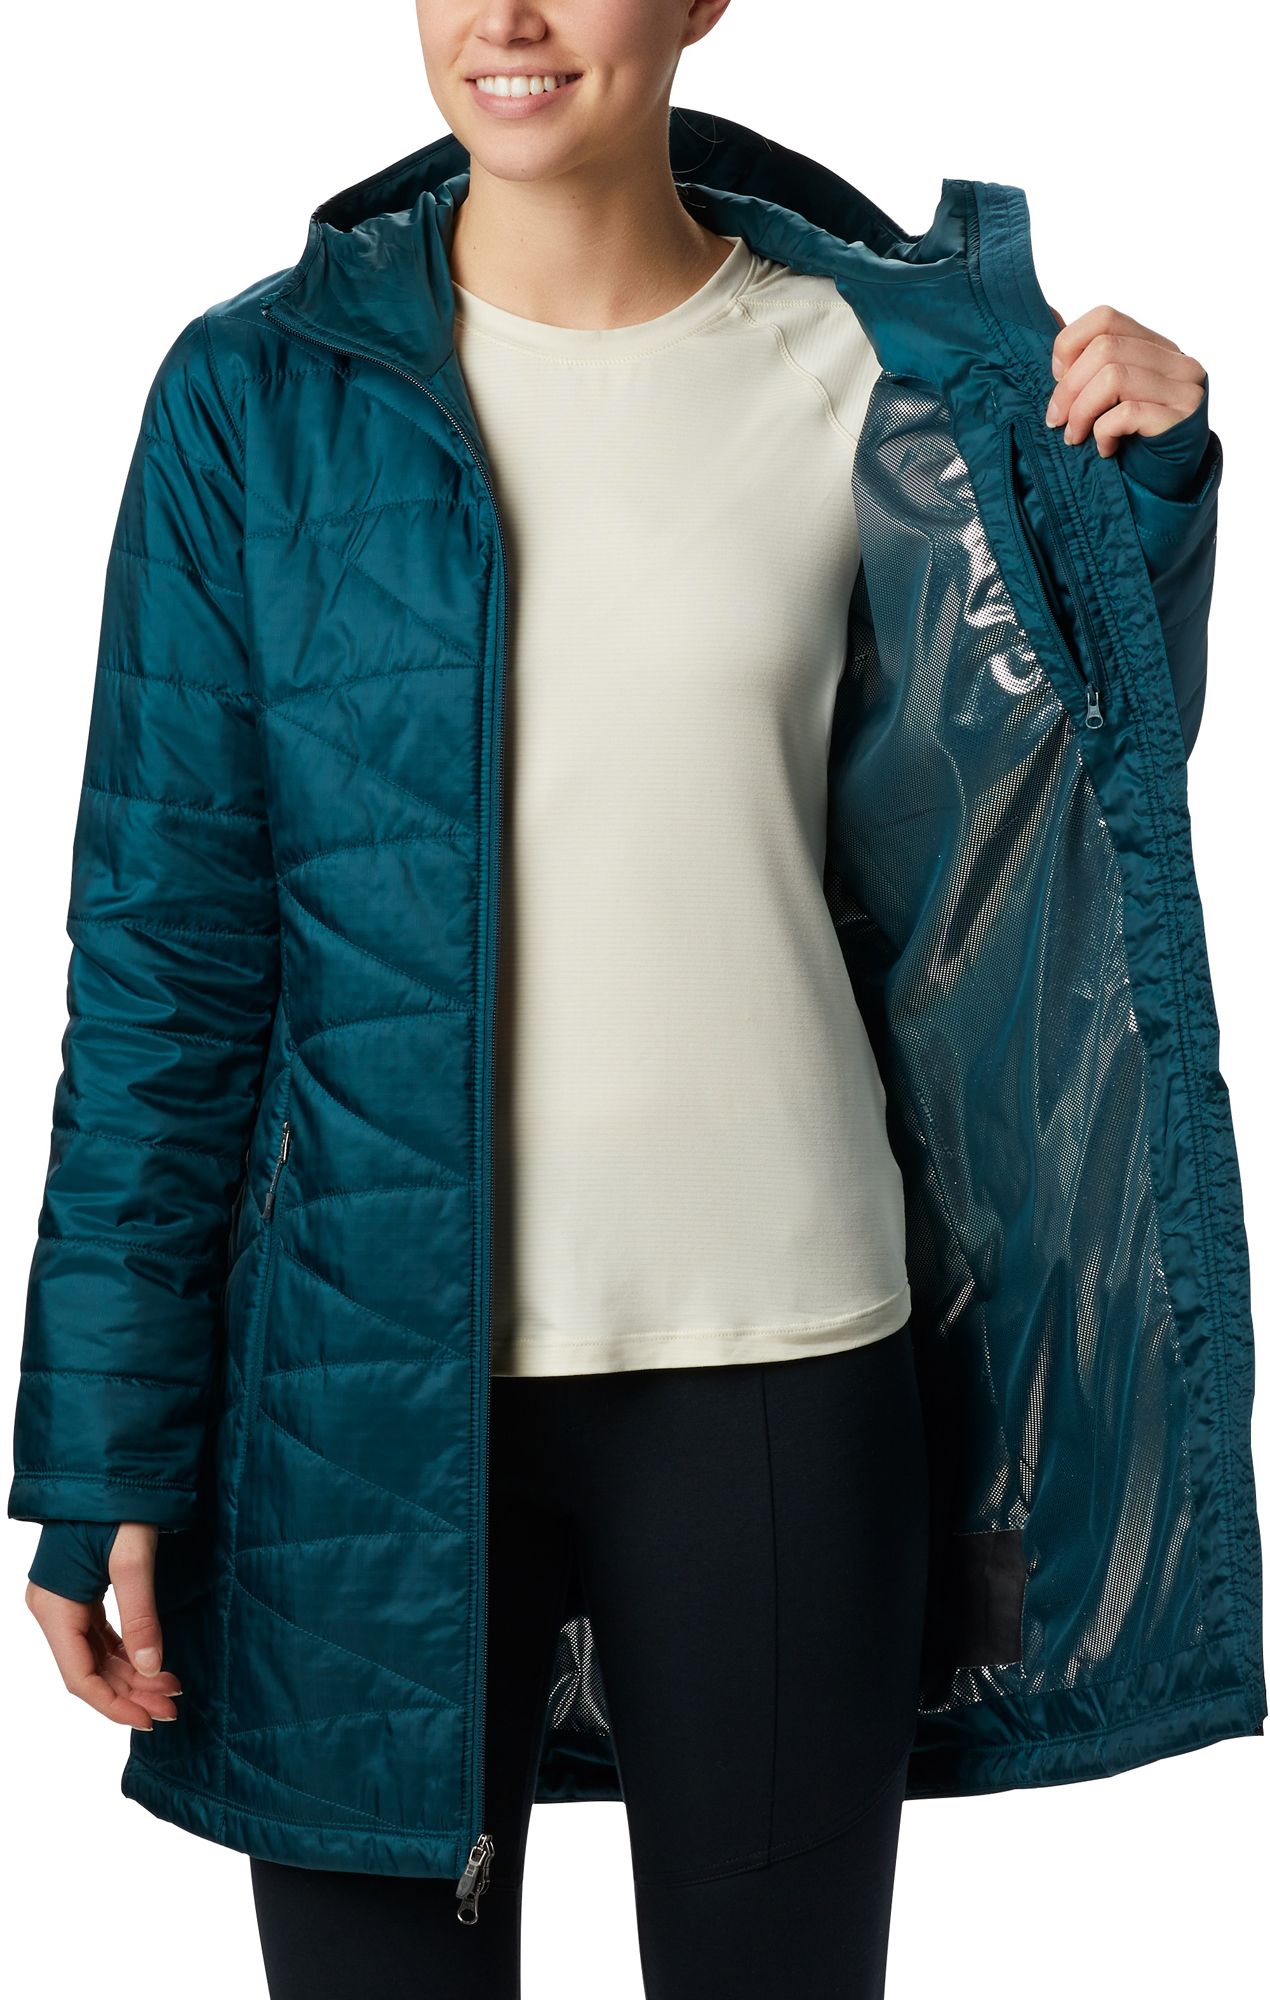 columbia mighty lite long jacket